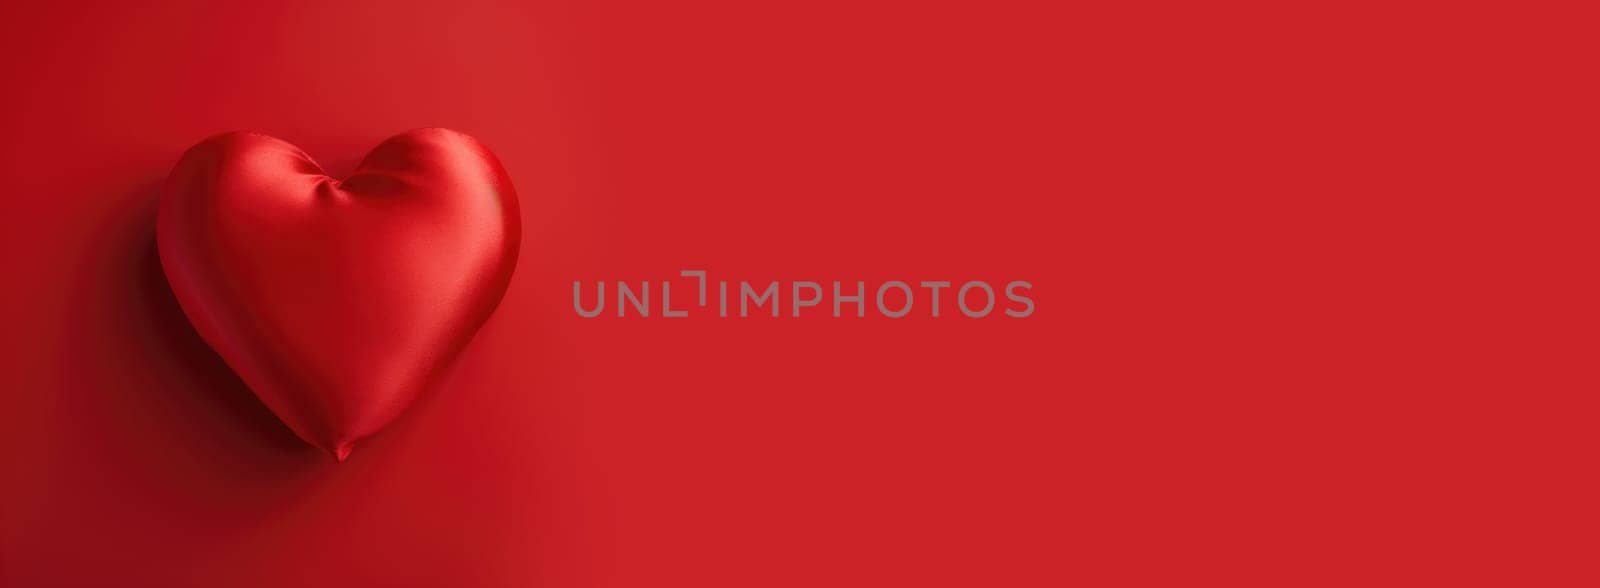 Banner of red soft Heart Shape on red background. Valentines day background. by JuliaDorian